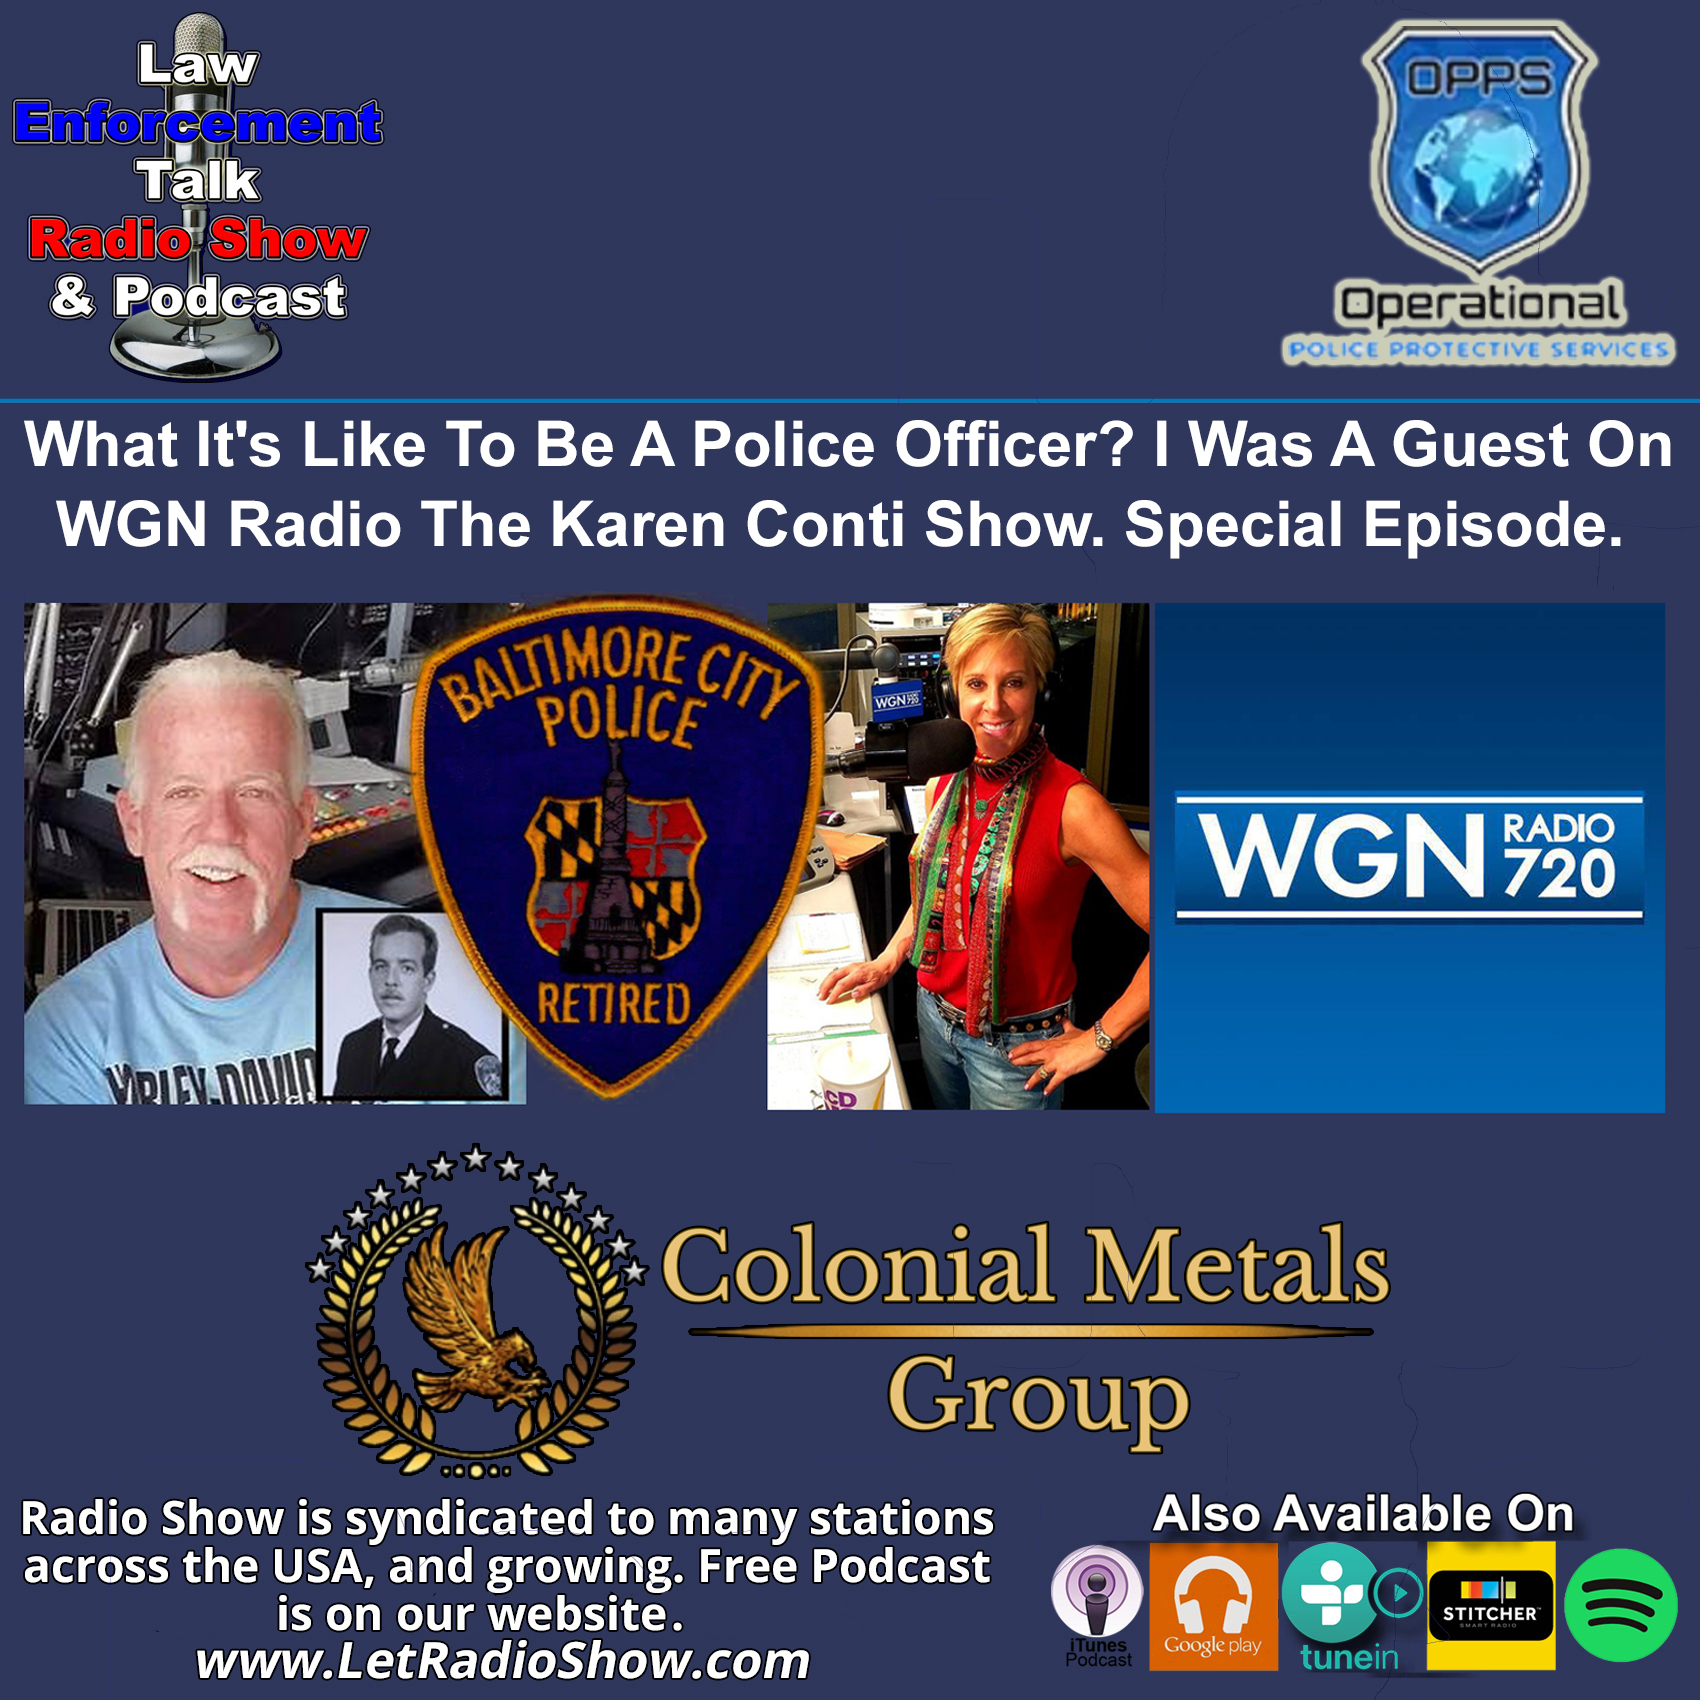 What It's Like To Be A Police Officer. I Was a Guest on WGN Radio,  Karen Conti Show. Special Episode.